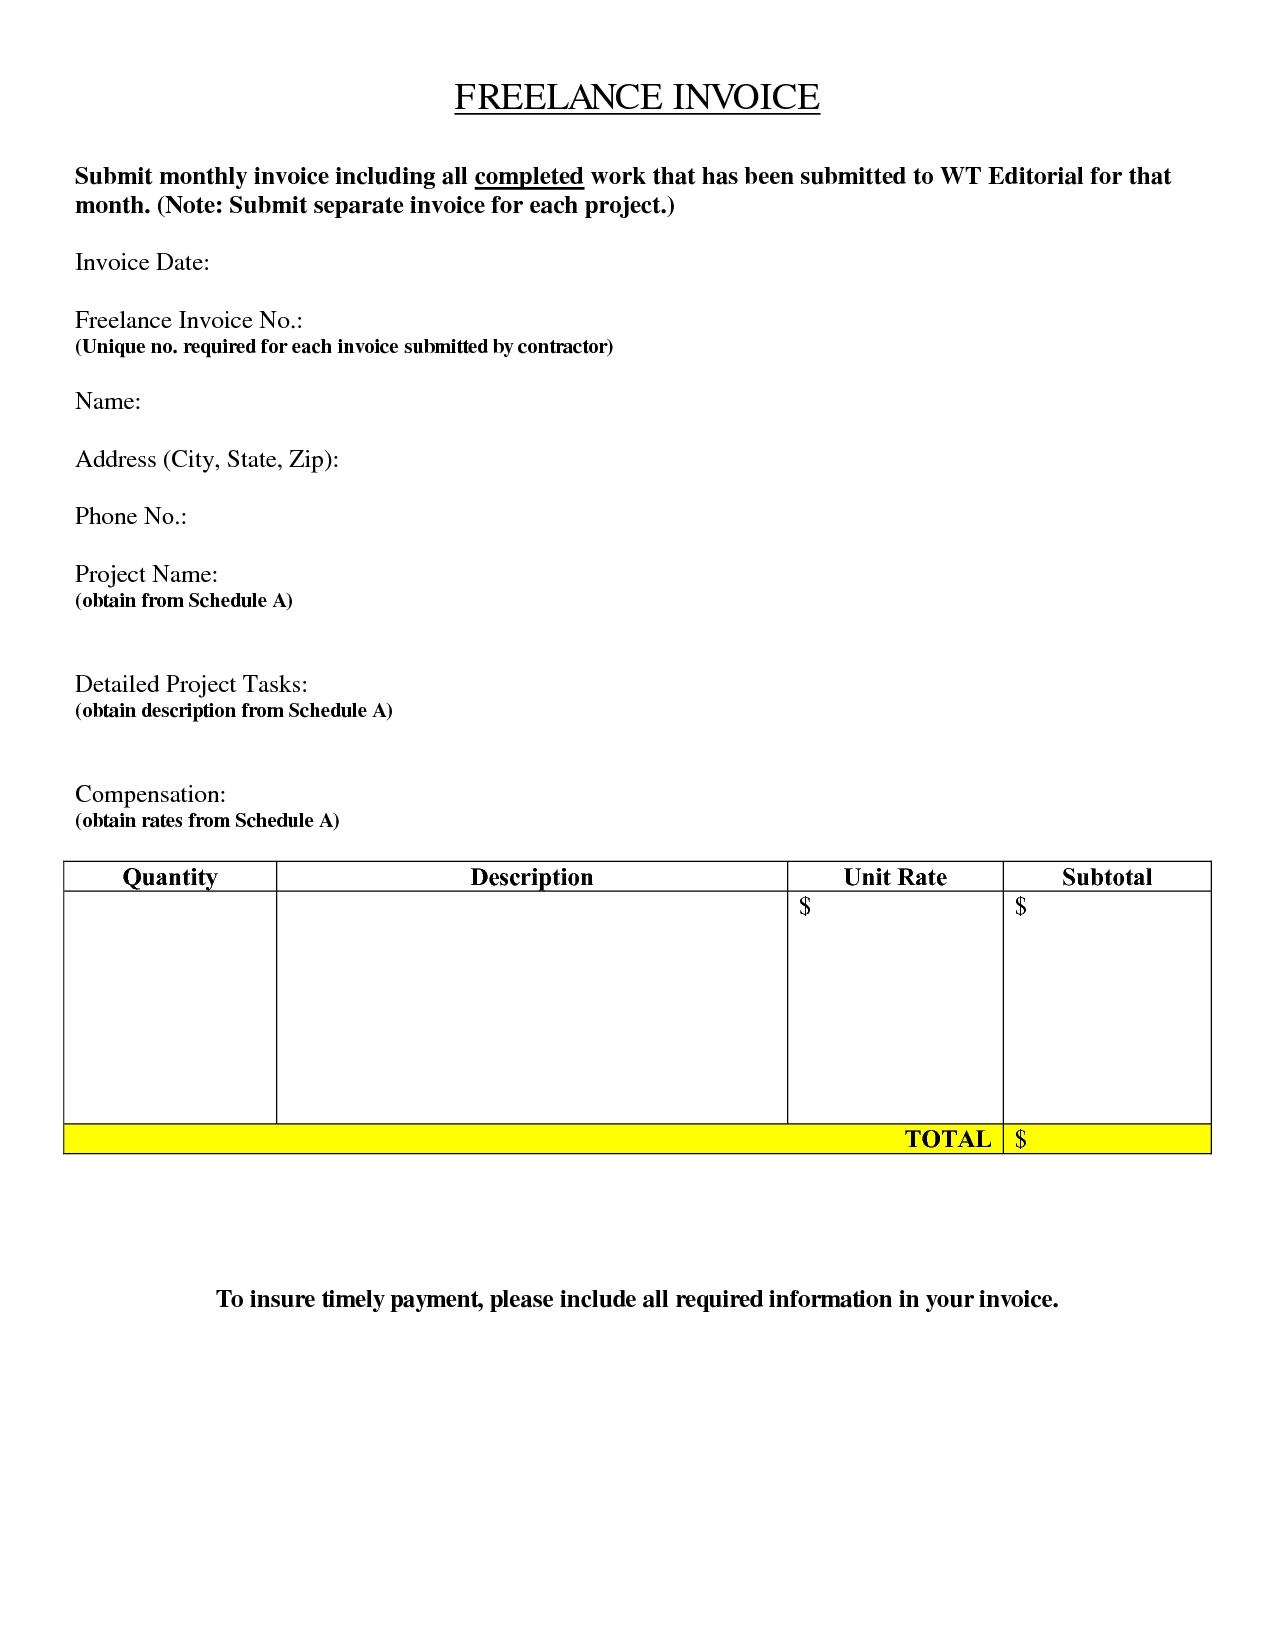 freelance writer invoice residers creating an invoice for freelance work